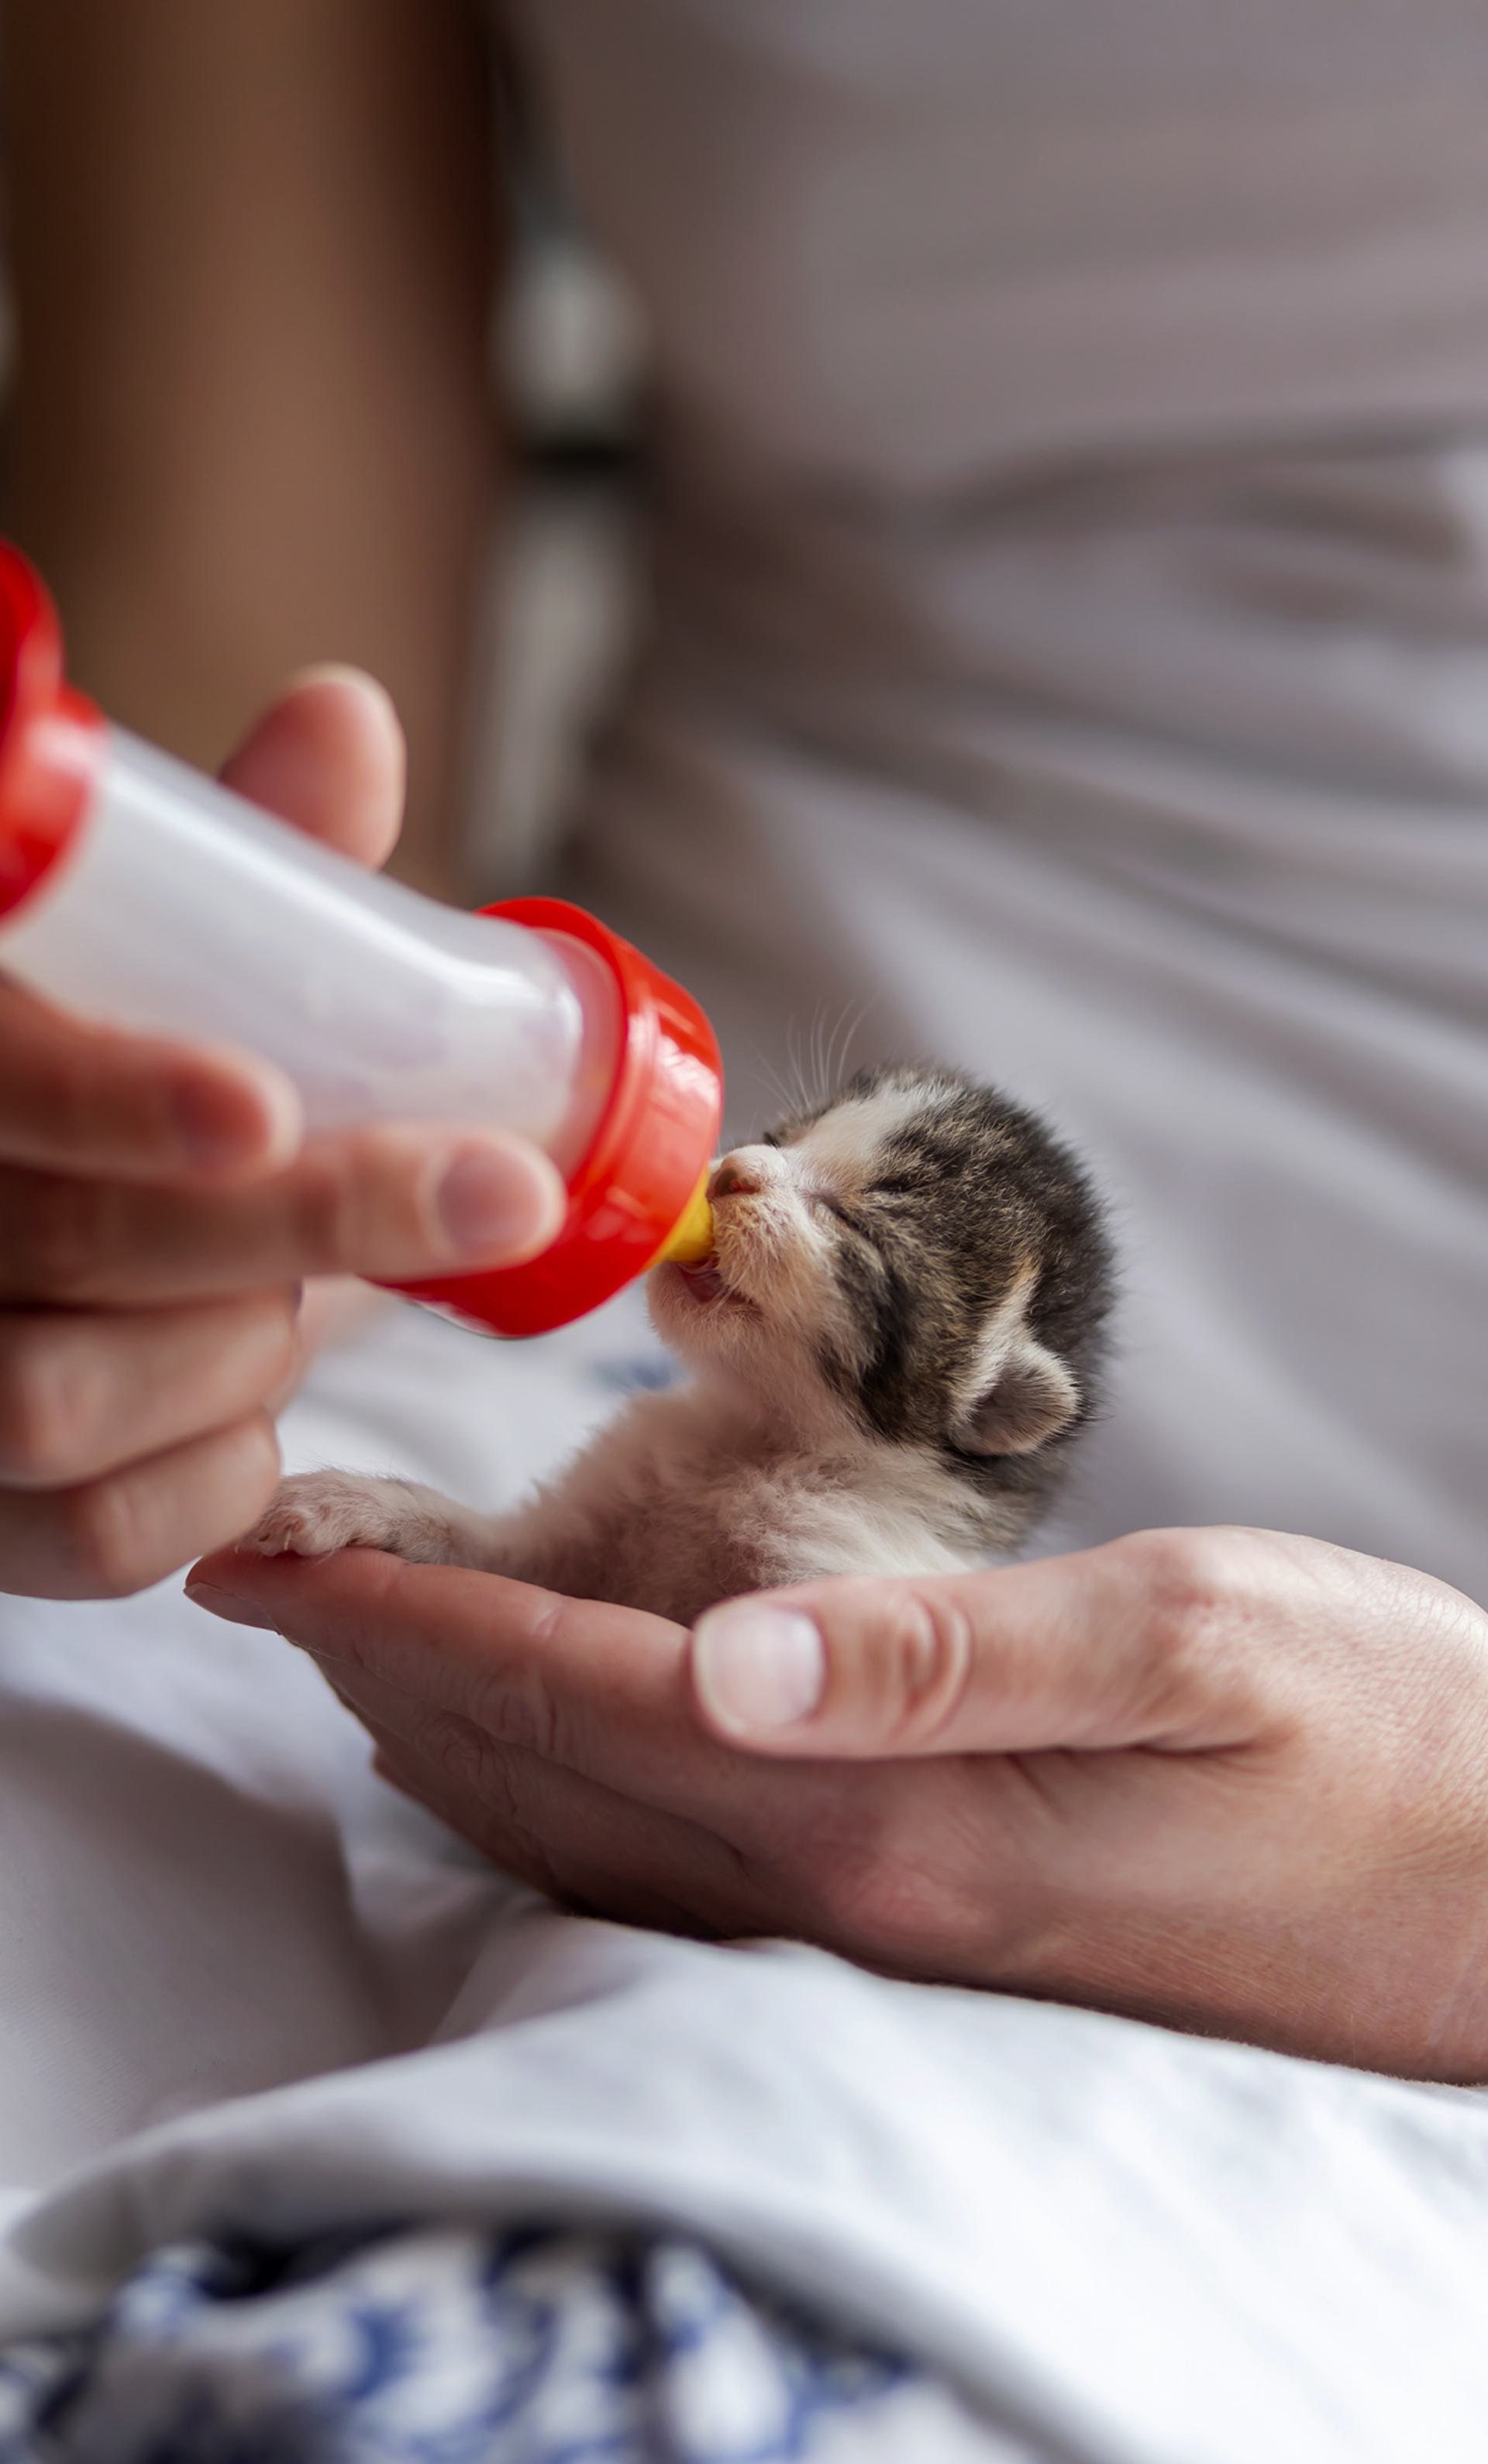 A close up of a baby cat being fed milk from a baby bottle.